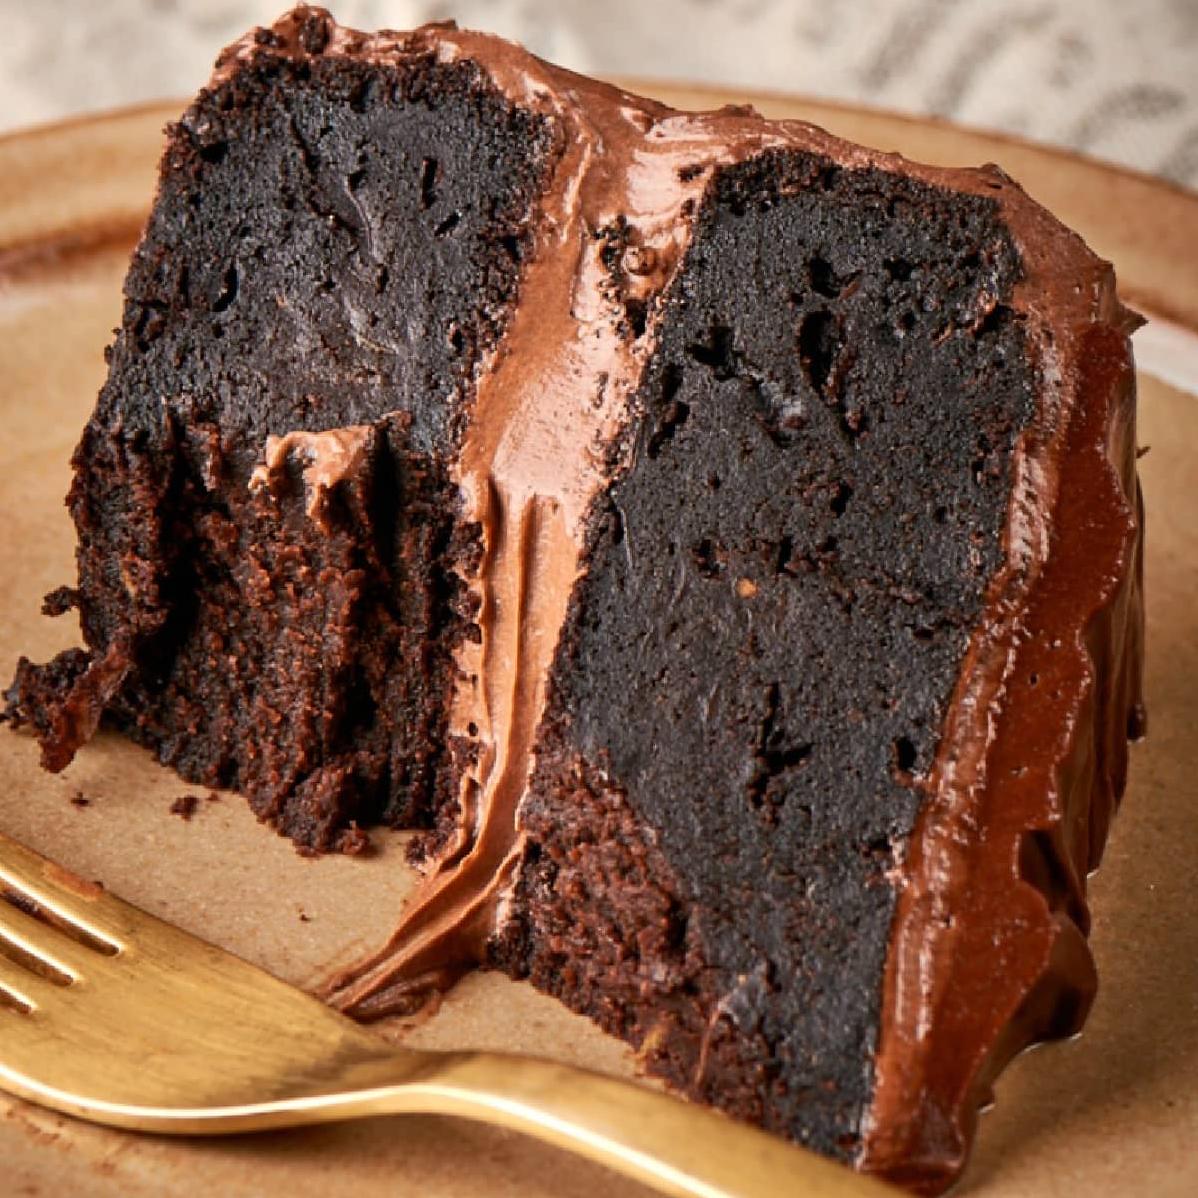  Gluten-free never tasted so good with this moist and chocolatey cake.